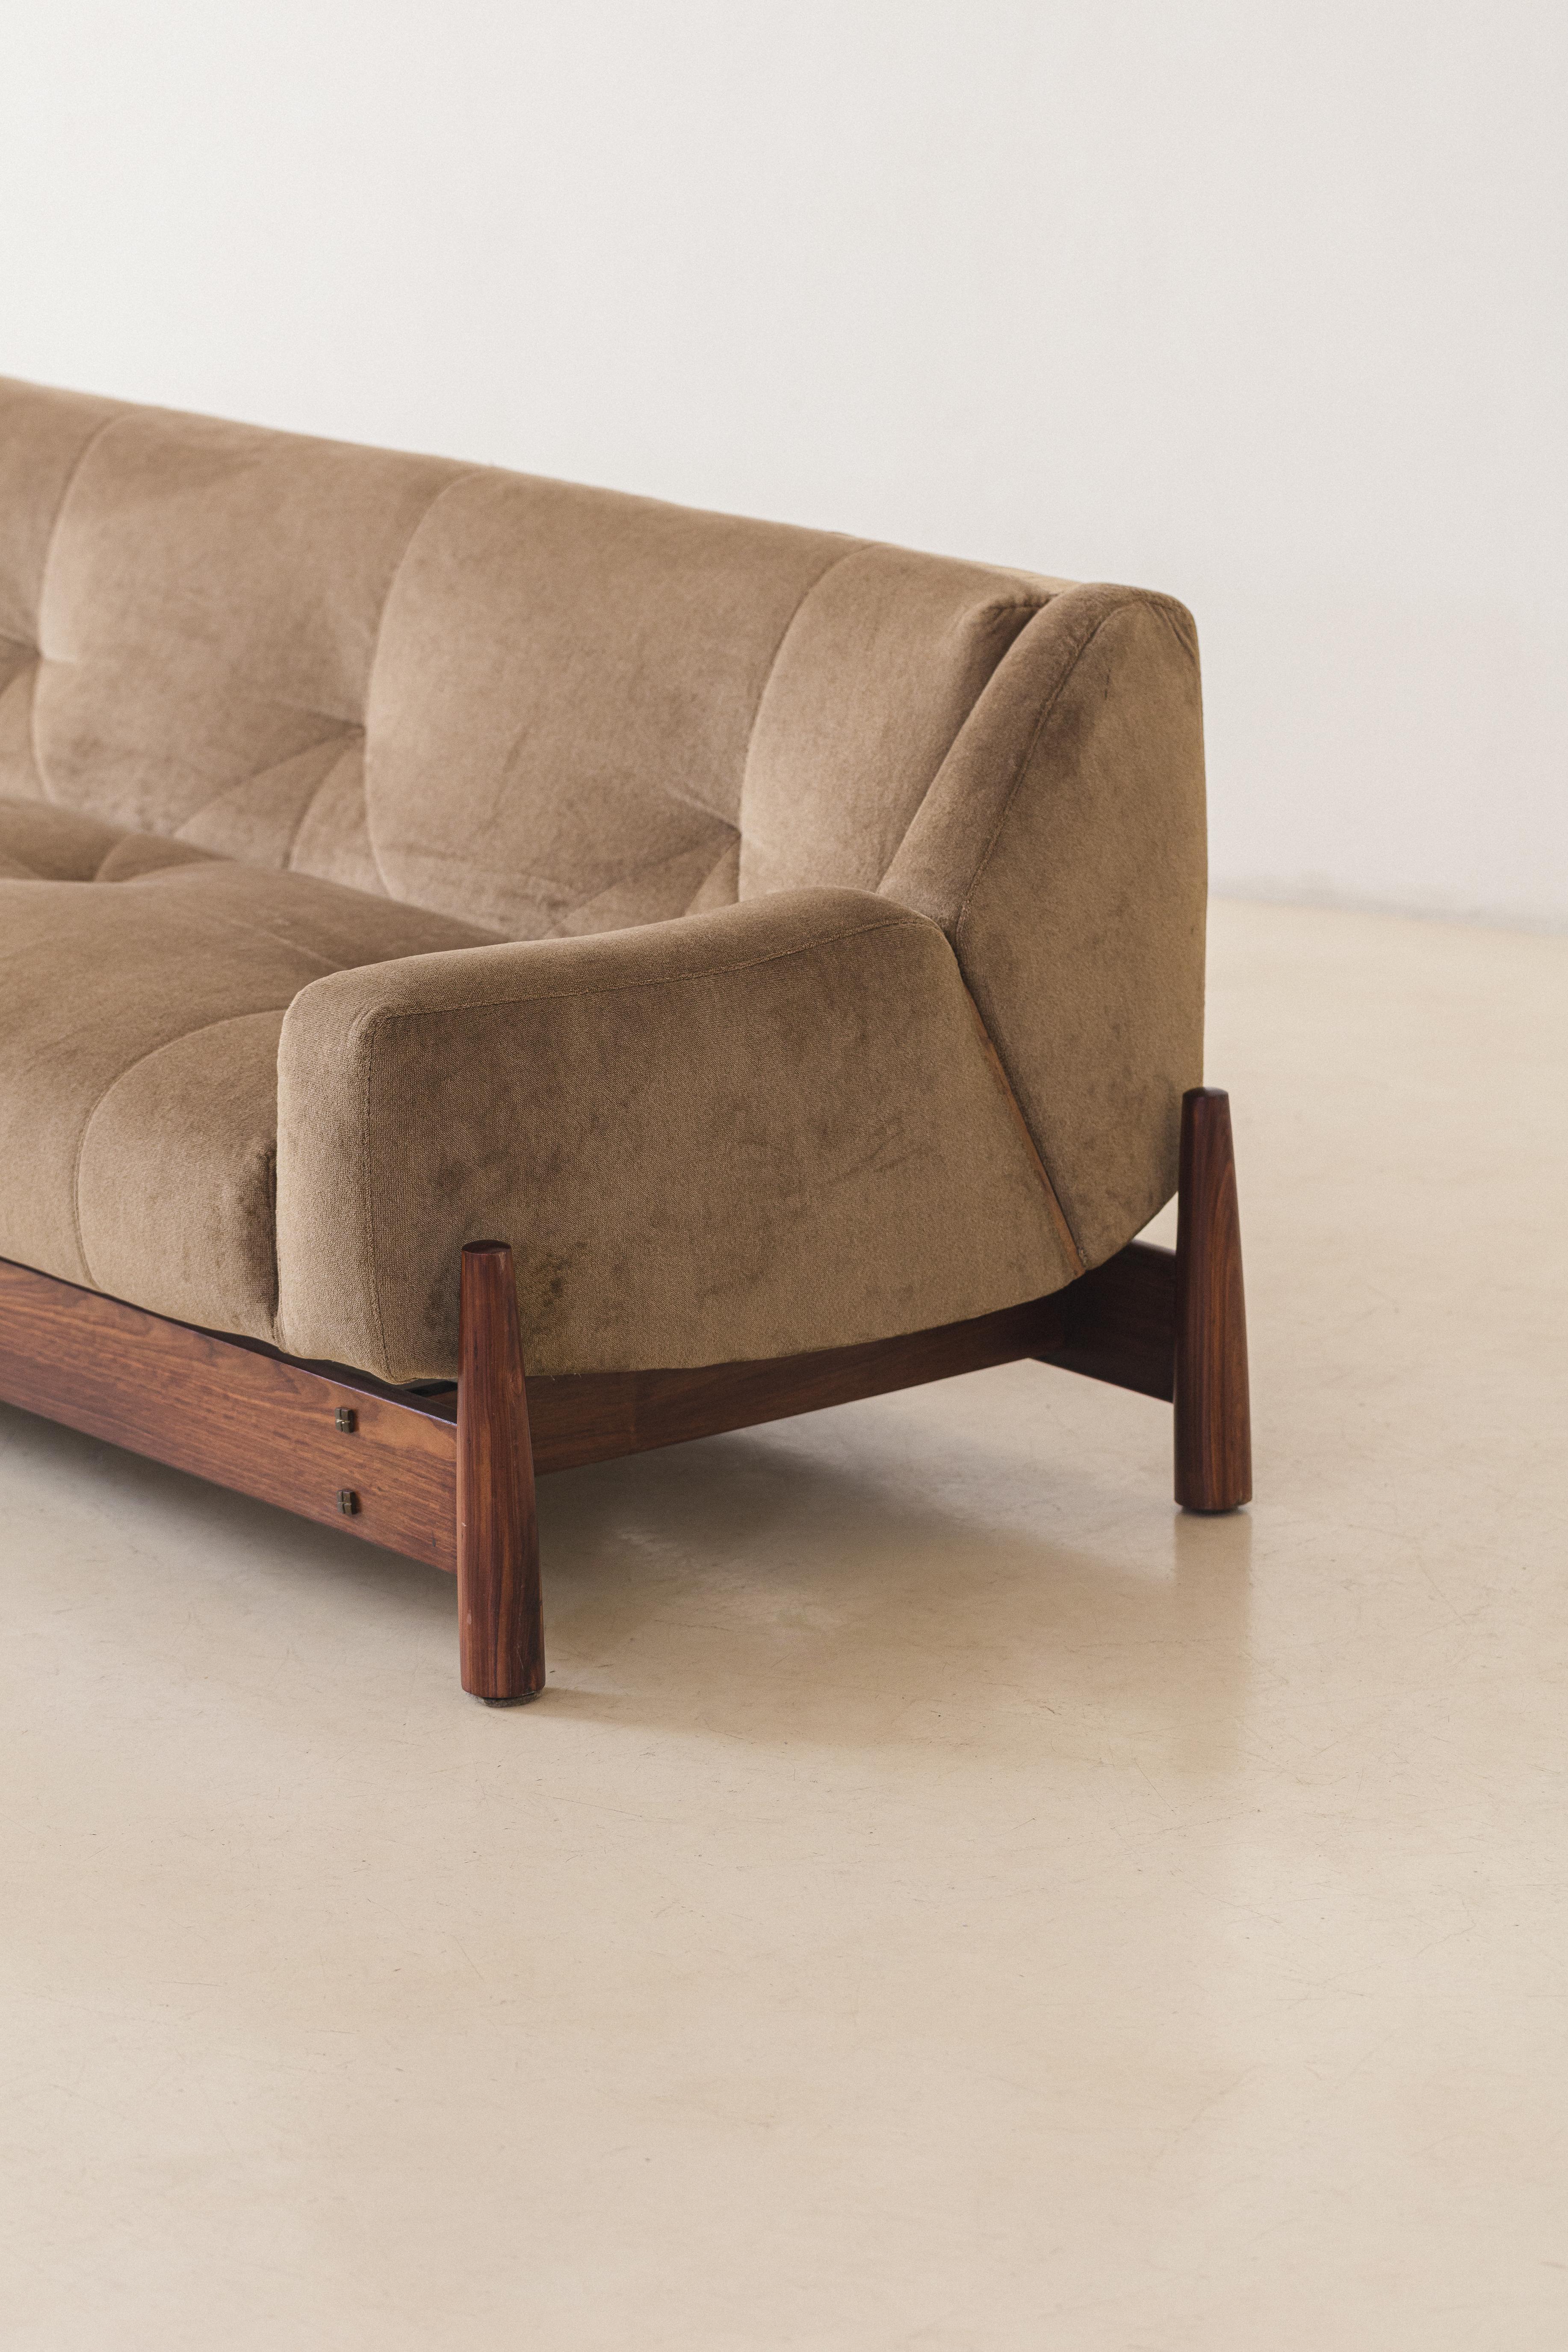 Imbuia wood Cimo Sofa Brazilian Design by Móveis Cimo, Mid-Century Modern, 1960s In Good Condition In New York, NY